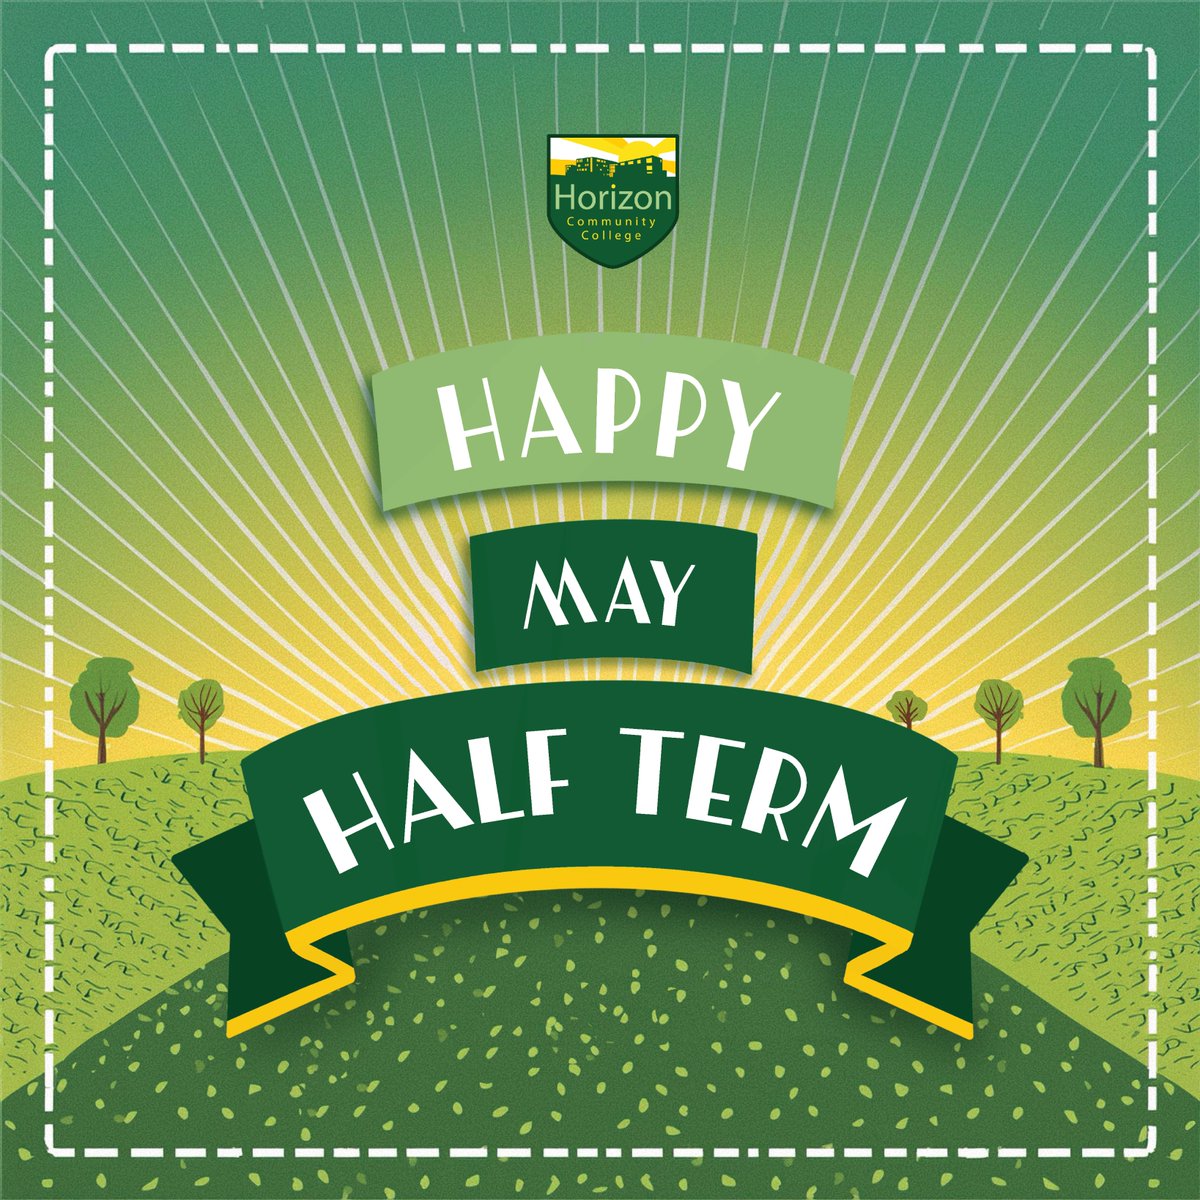 Happy May Half Term from everyone at Horizon- we hope you all have a well deserved break! We will welcome students back to college Monday the 3rd of June